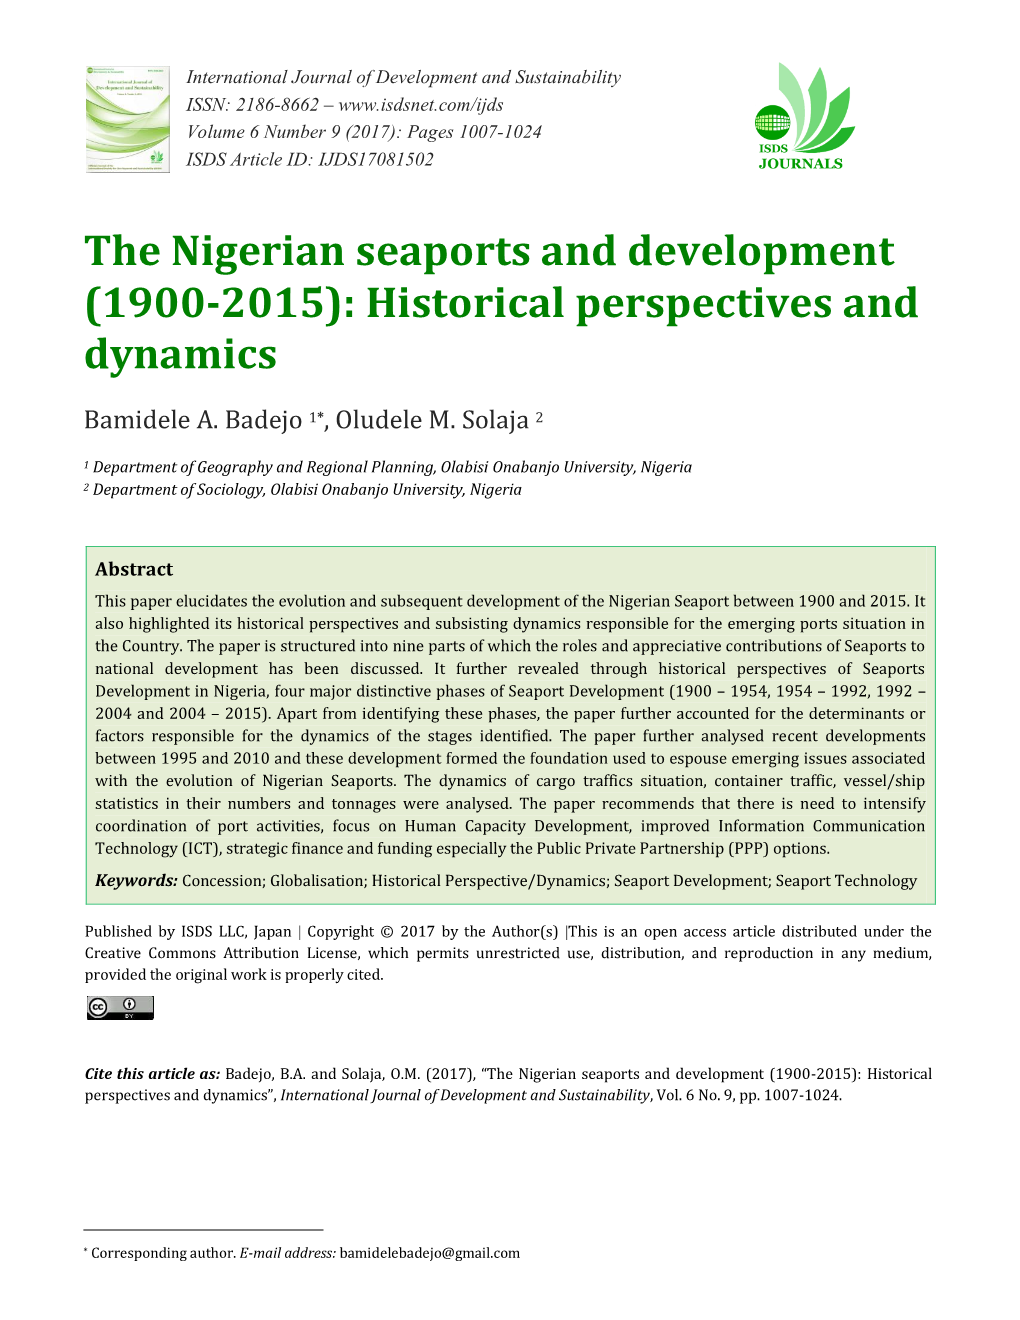 The Nigerian Seaports and Development (1900-2015): Historical Perspectives and Dynamics